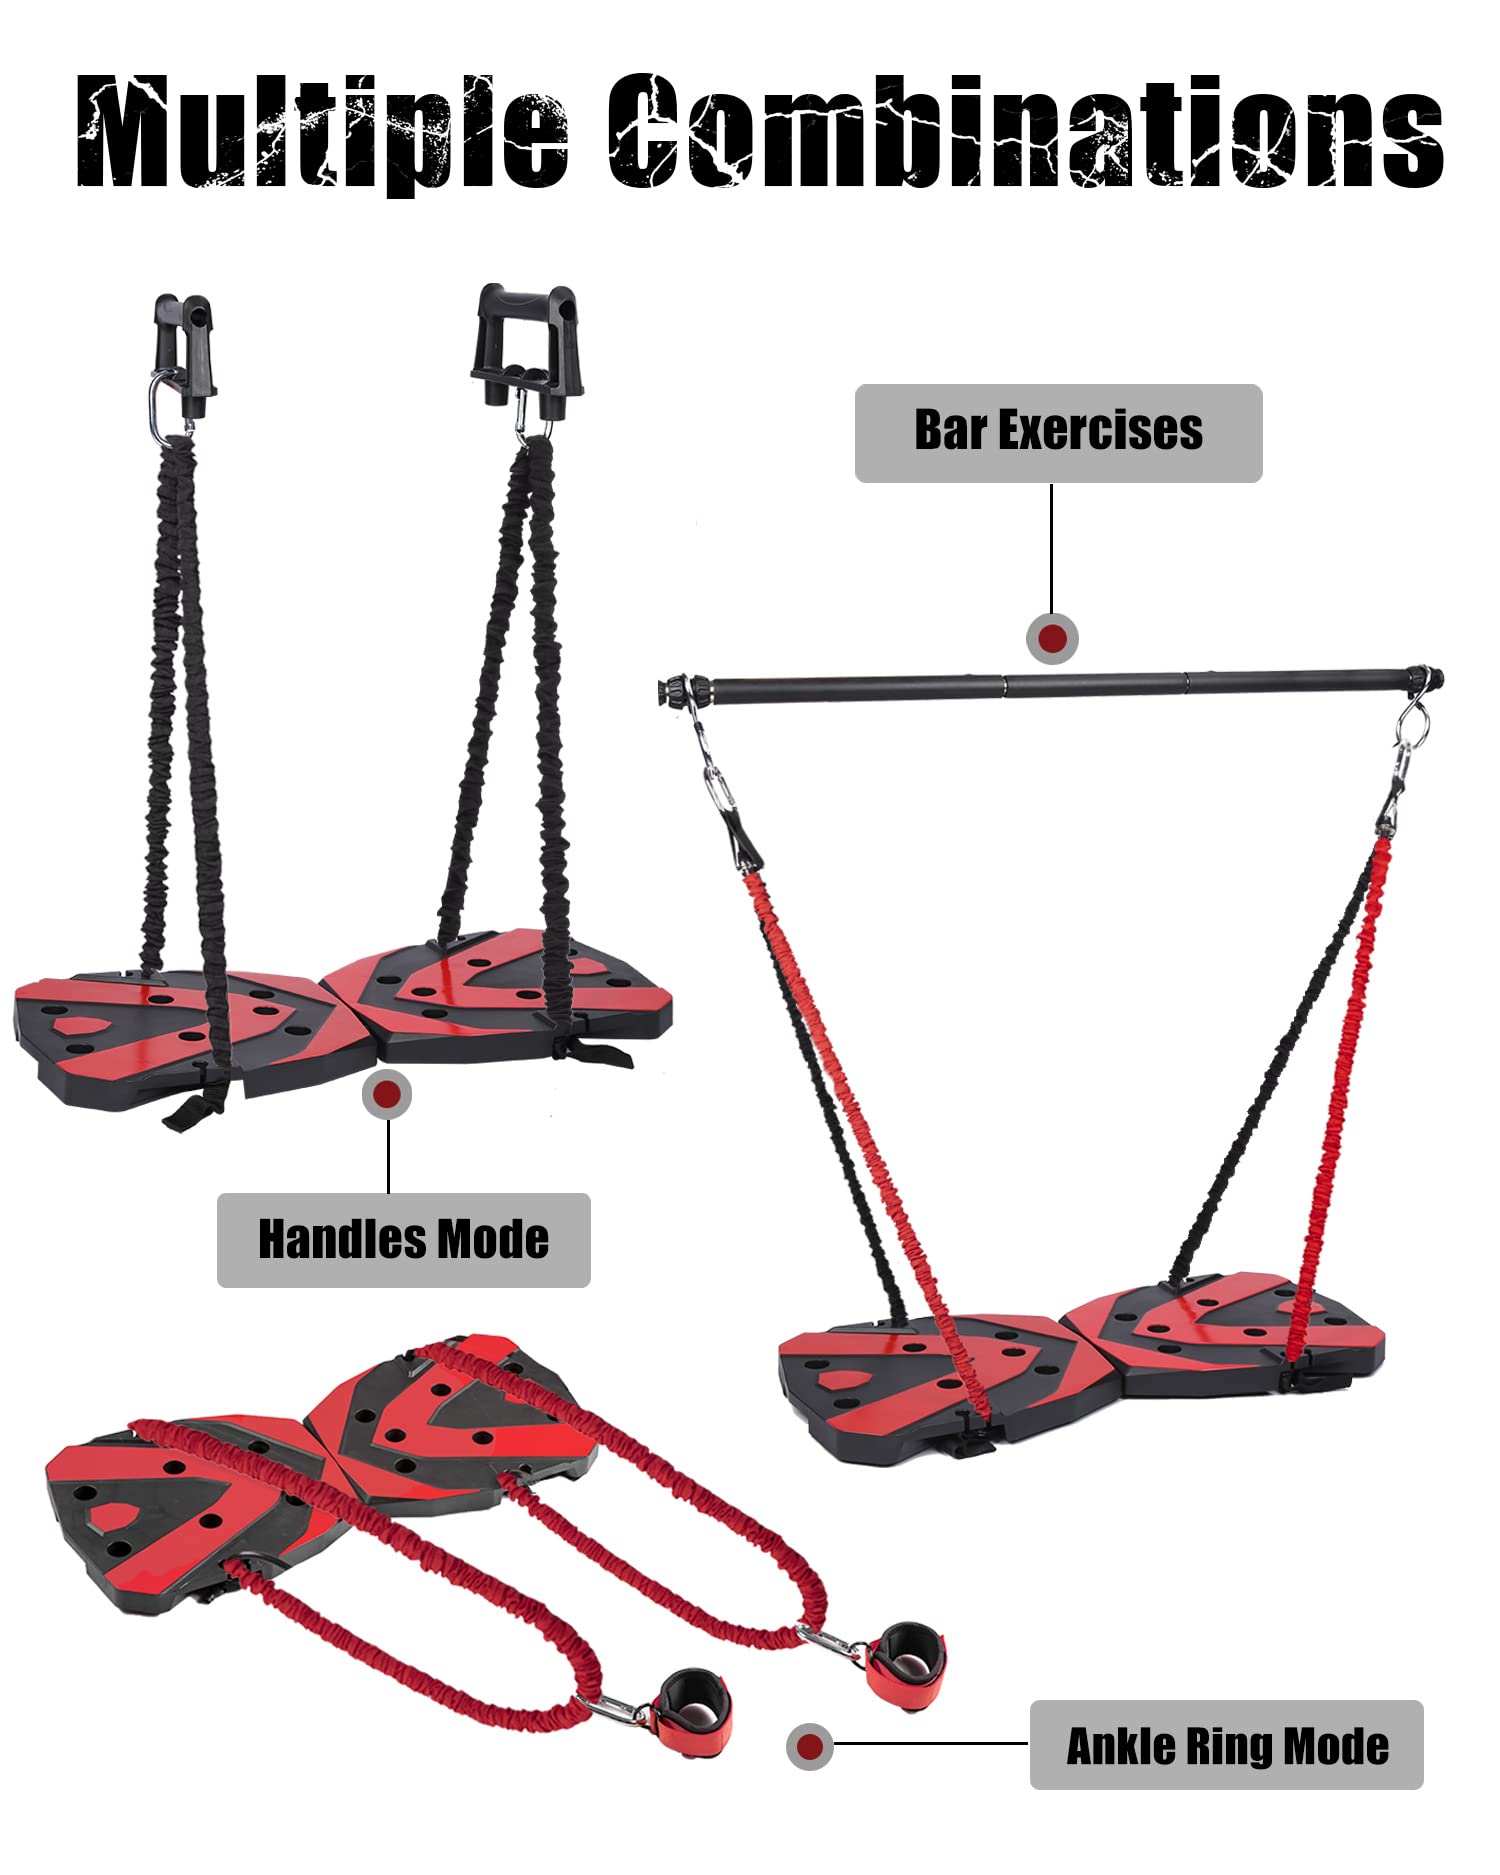 Portable Home Gym Workout Equipment with 12 Exercise Accessories Including Heavy Resistance Bands,Abs Workout,,Push-up Stand, Tricep Bar,Pilates Bar and More for Full Body Workouts System Men Women